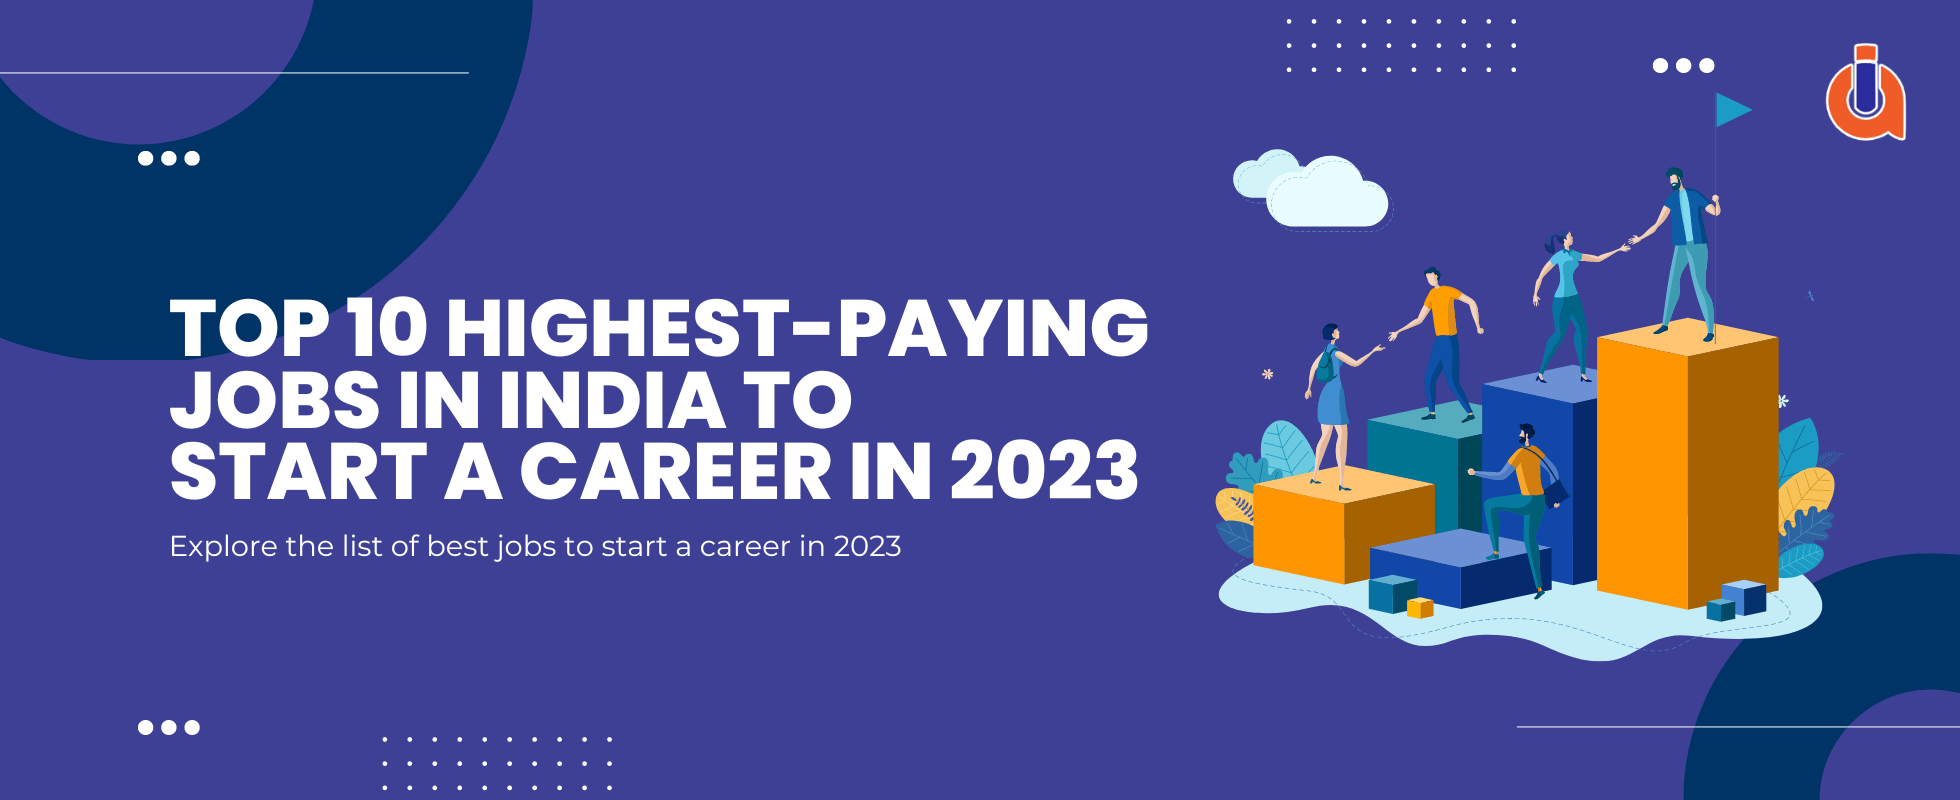 Highest paying jobs in India in 2023